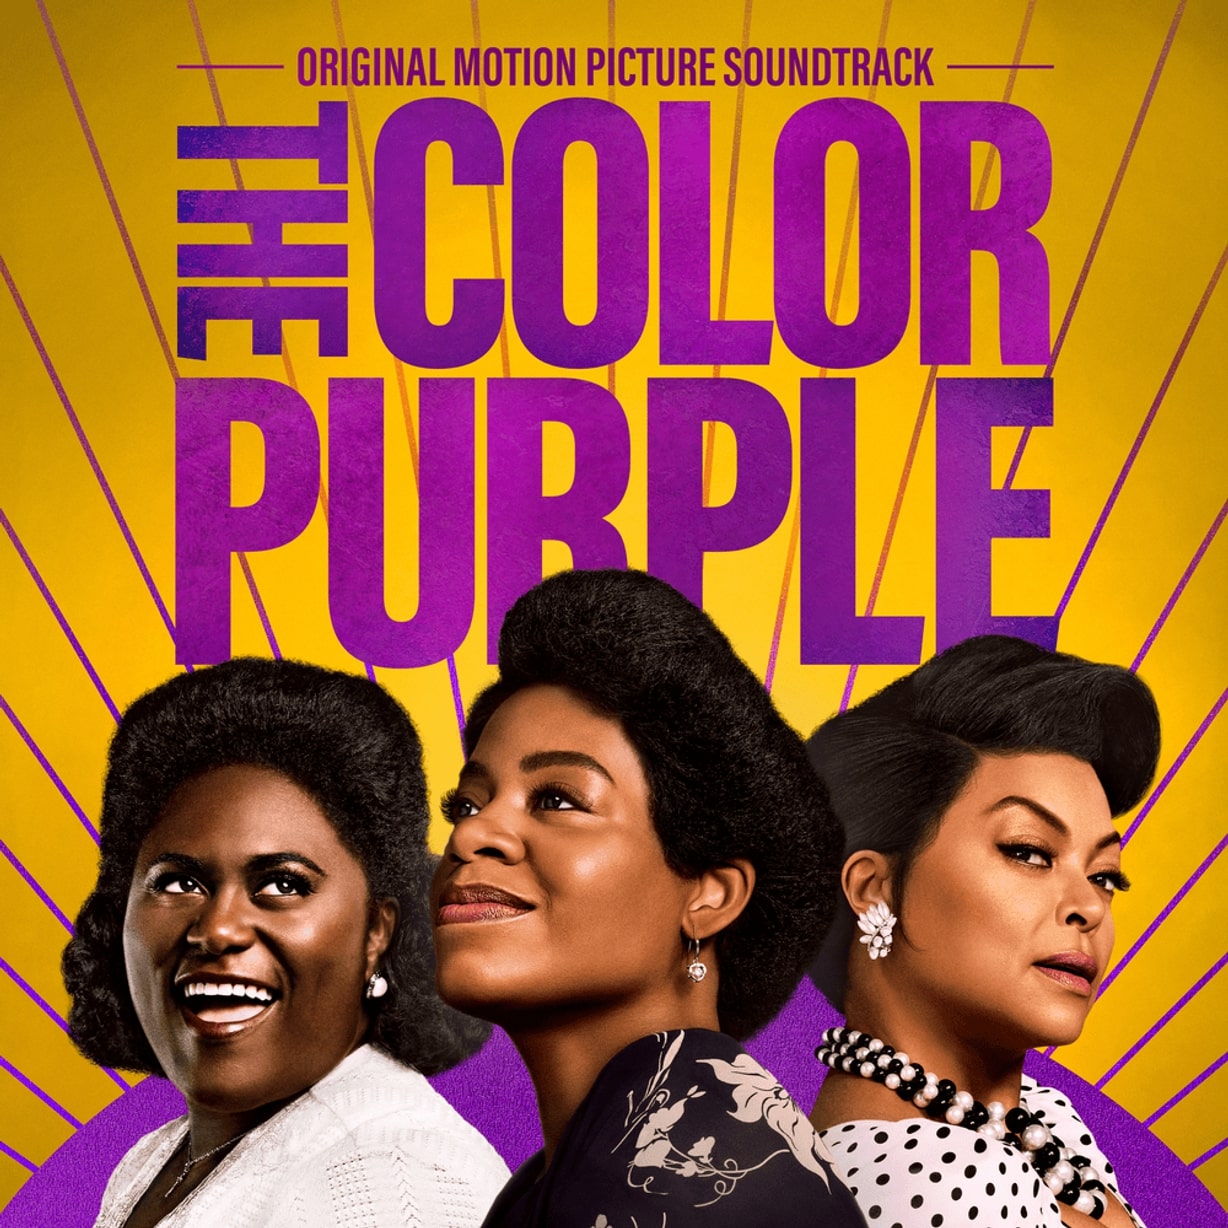 Everything about the color Purple